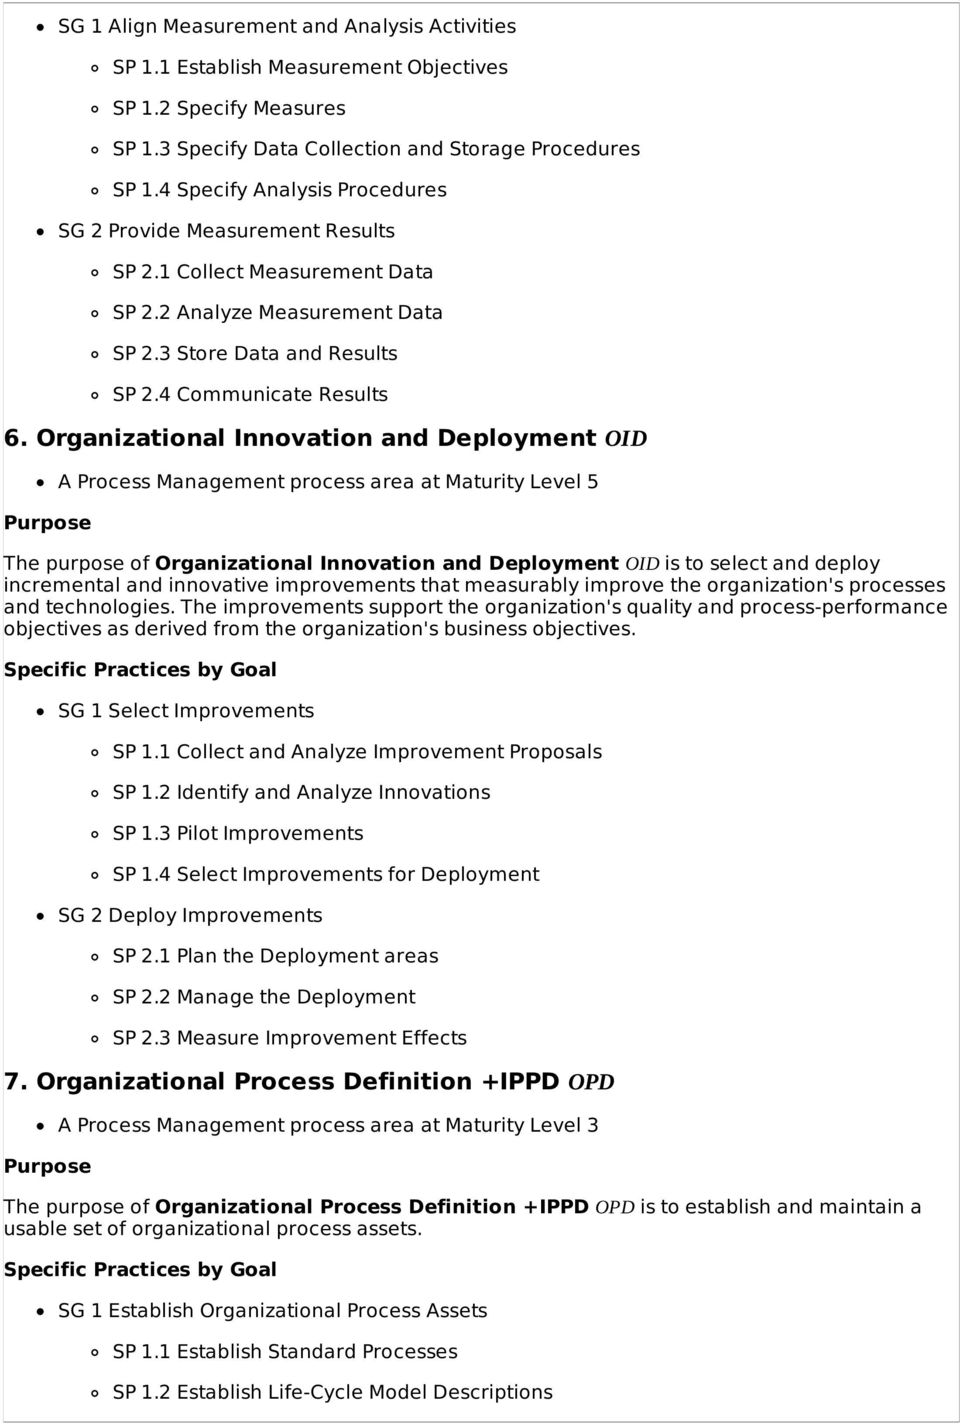 Organizational Innovation and Deployment OID A Process Management process area at Maturity Level 5 The purpose of Organizational Innovation and Deployment OID is to select and deploy incremental and